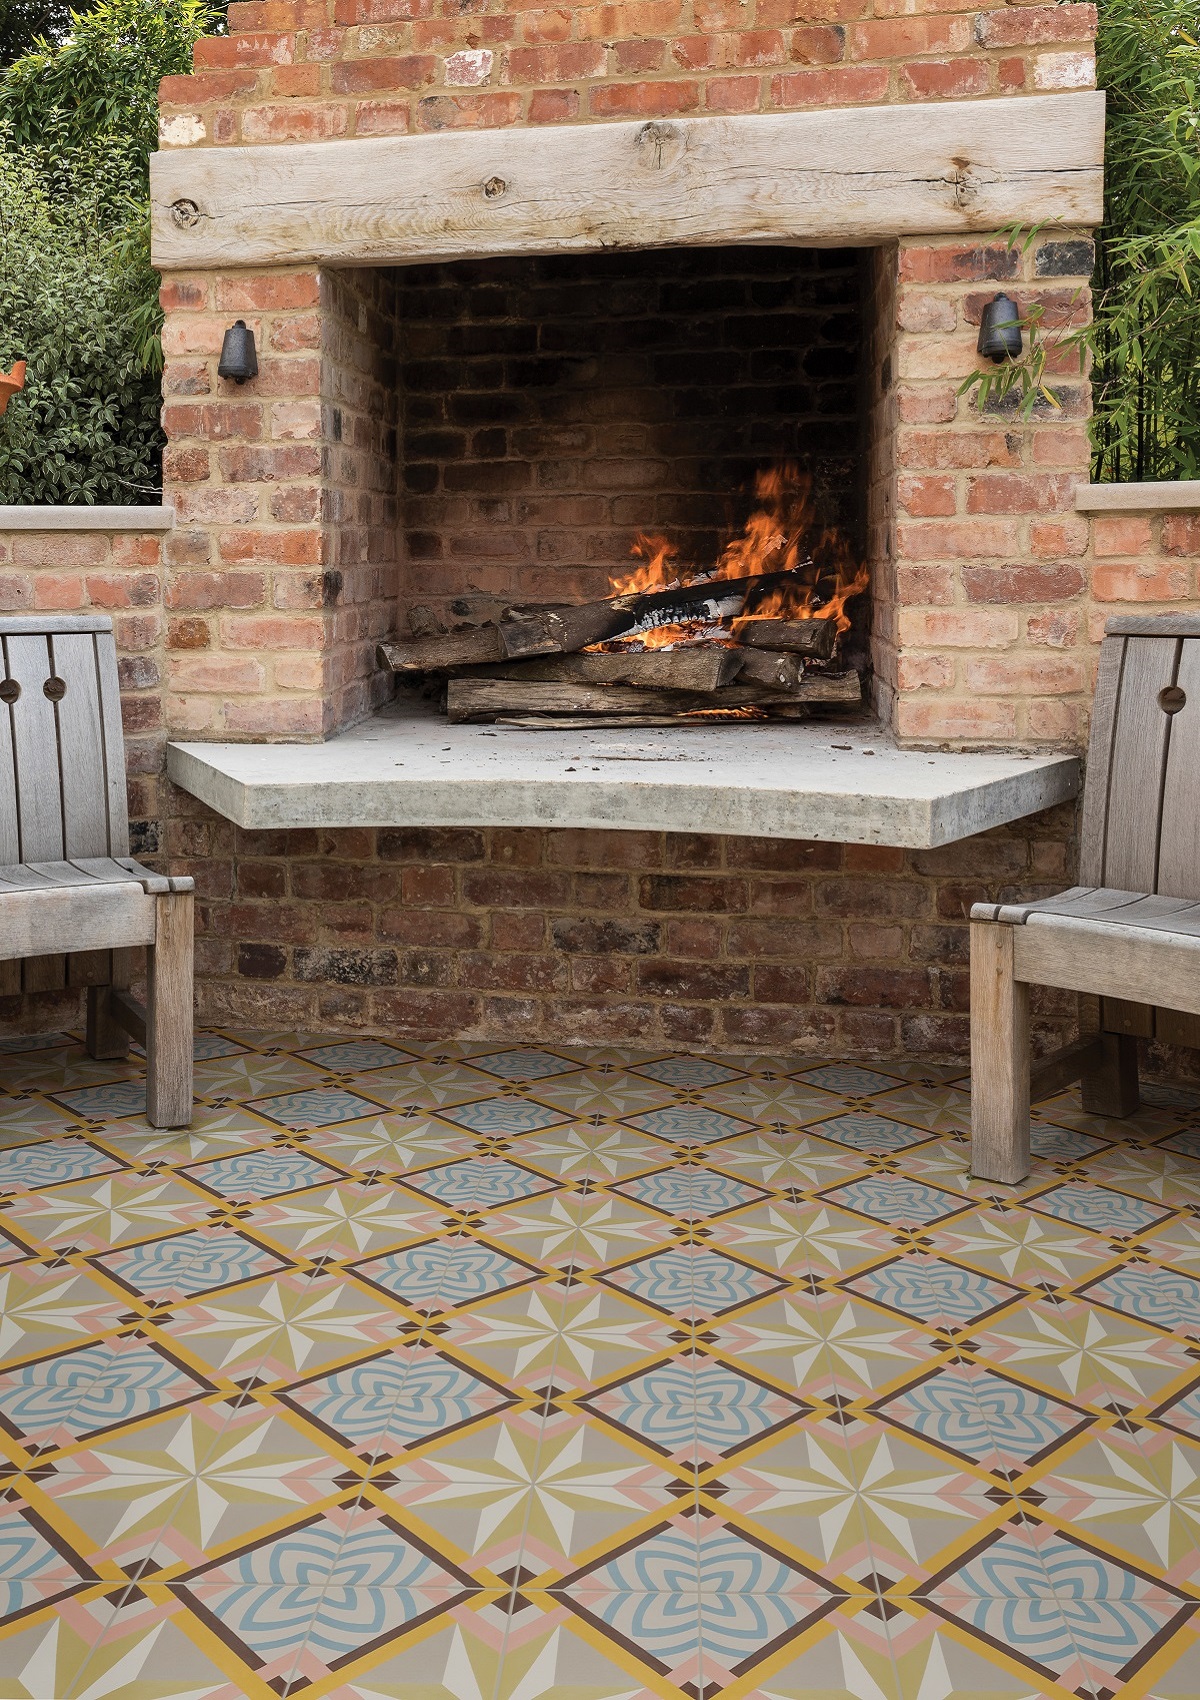 patterned Cabana tiles by Hyperion Tiles surround the barbecue